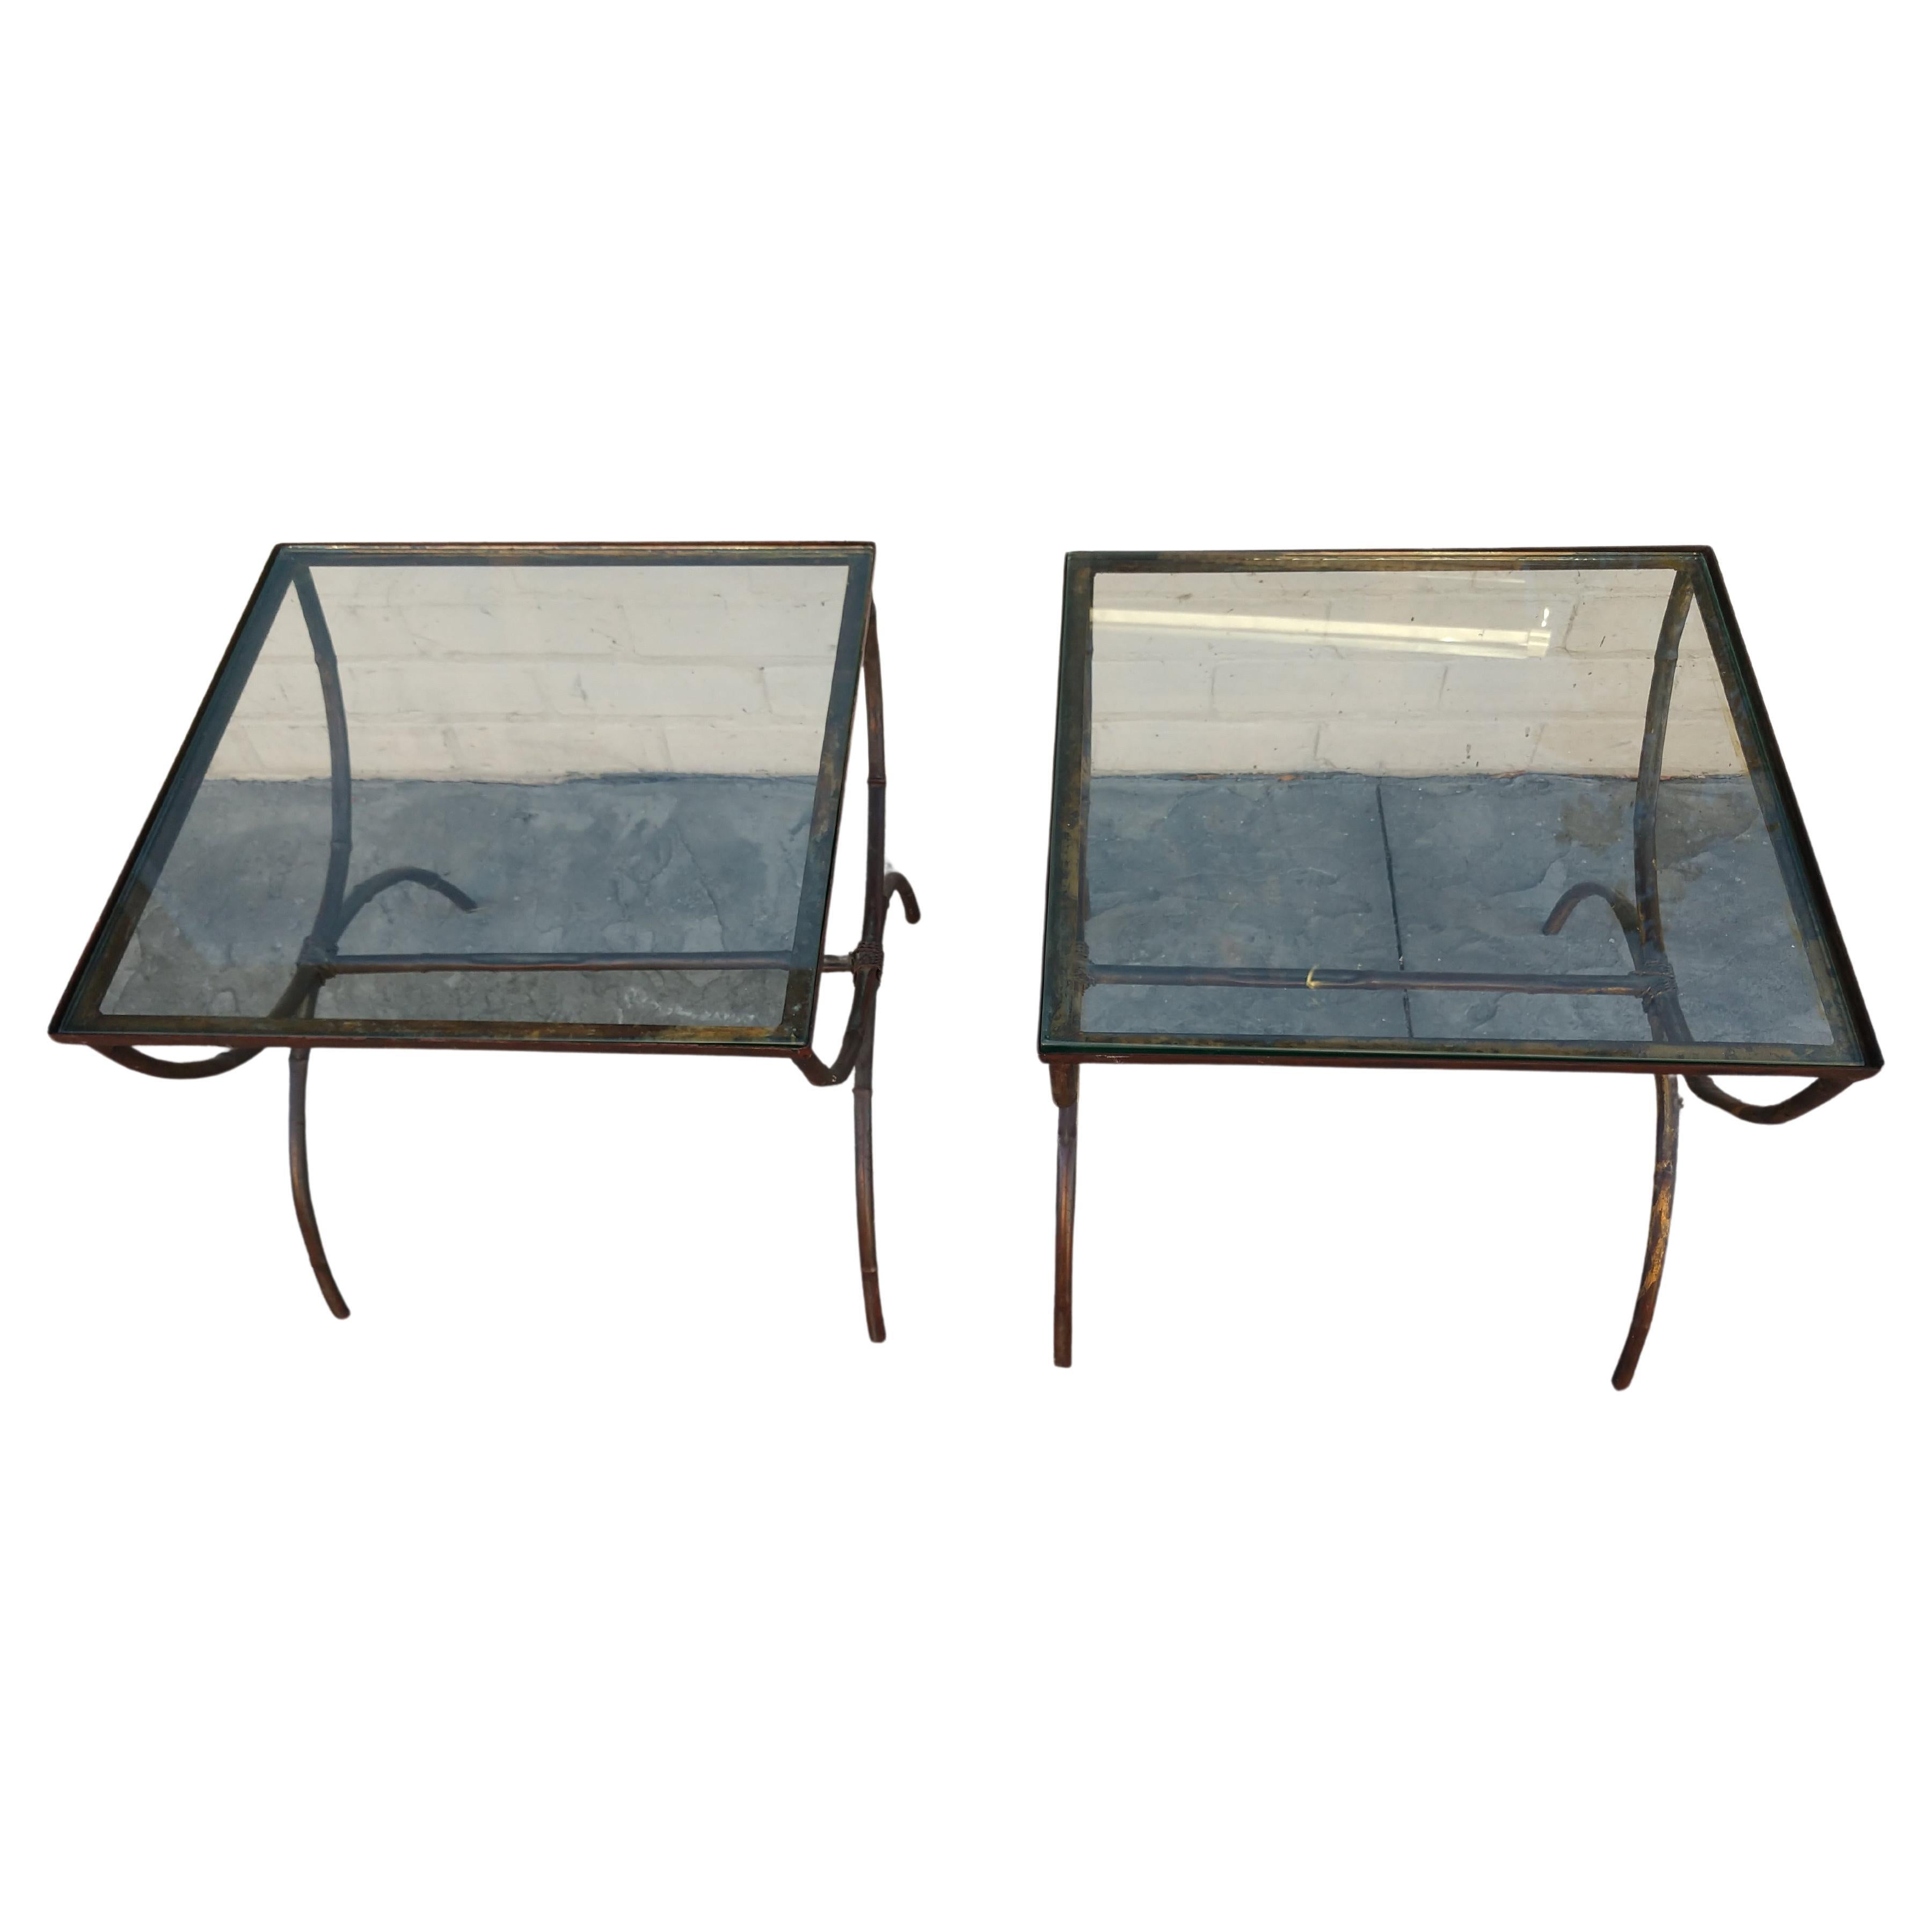 Pair Of Mid Century Gilt Faux Bamboo Glass Top Side or End Tables In Good Condition For Sale In Port Jervis, NY